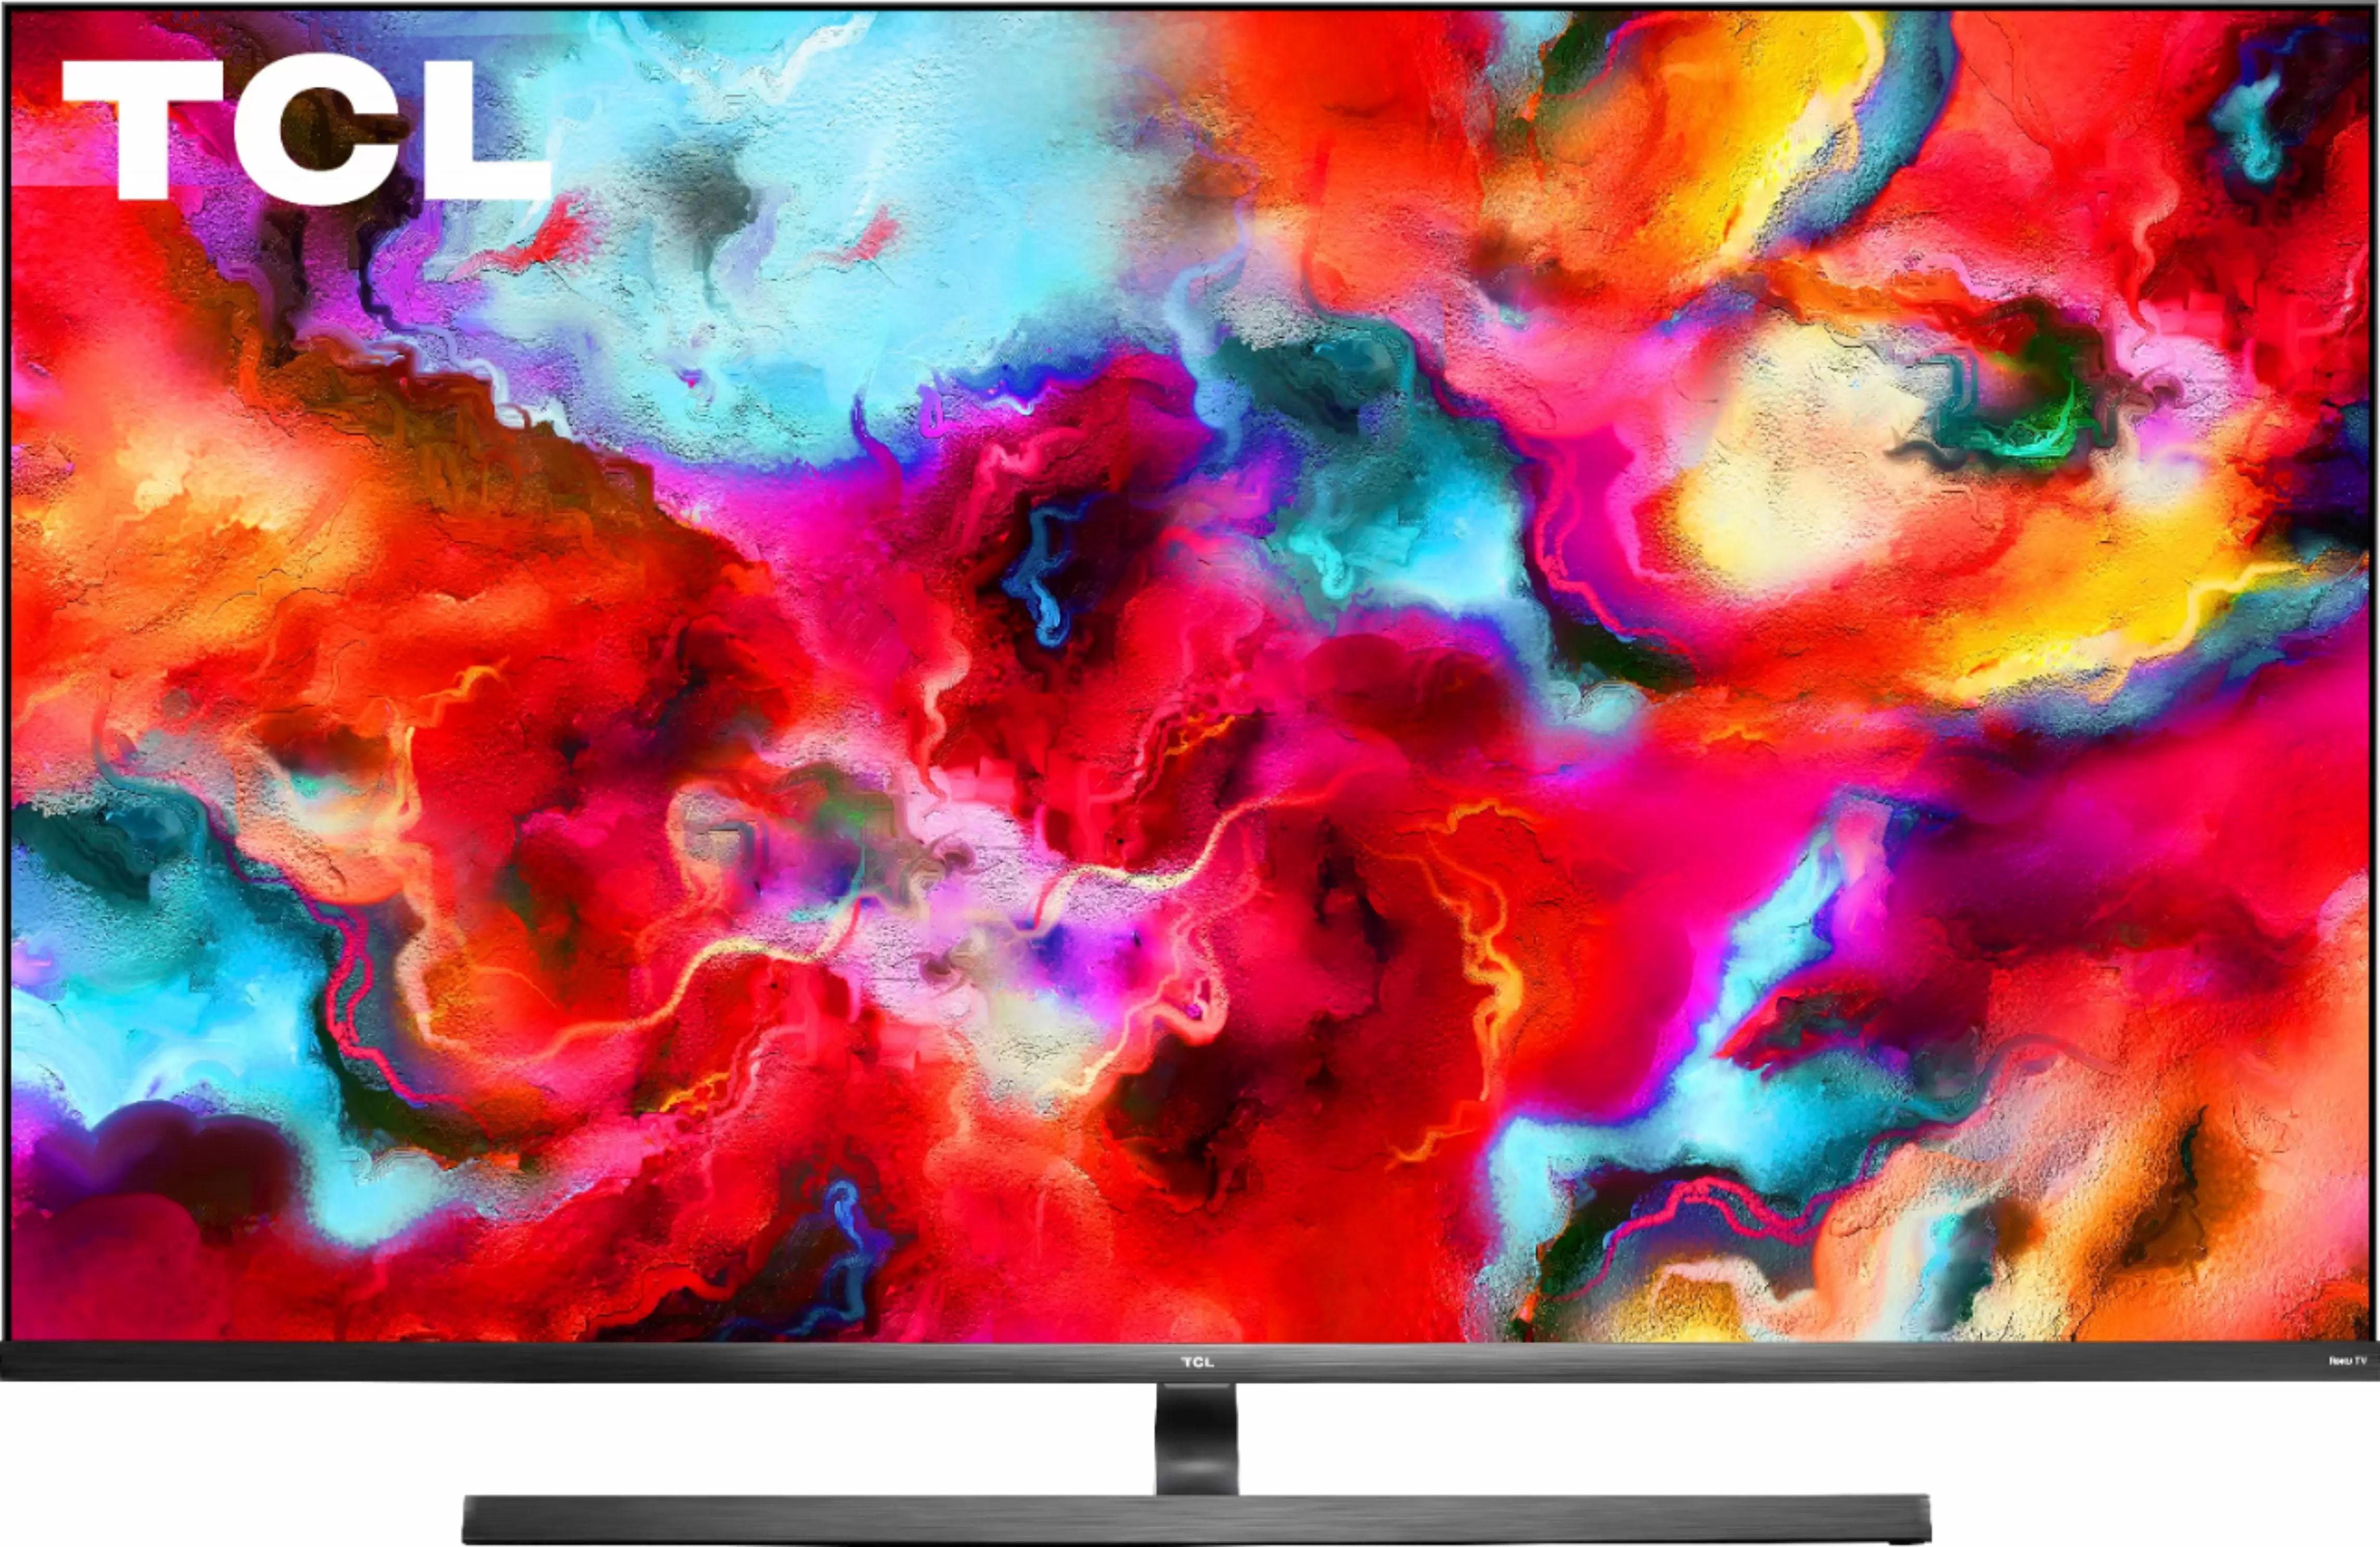 75in TCL 75Q825 8 Series 4K QLED UHD Roku Smart TV for $1499.99 Shipped